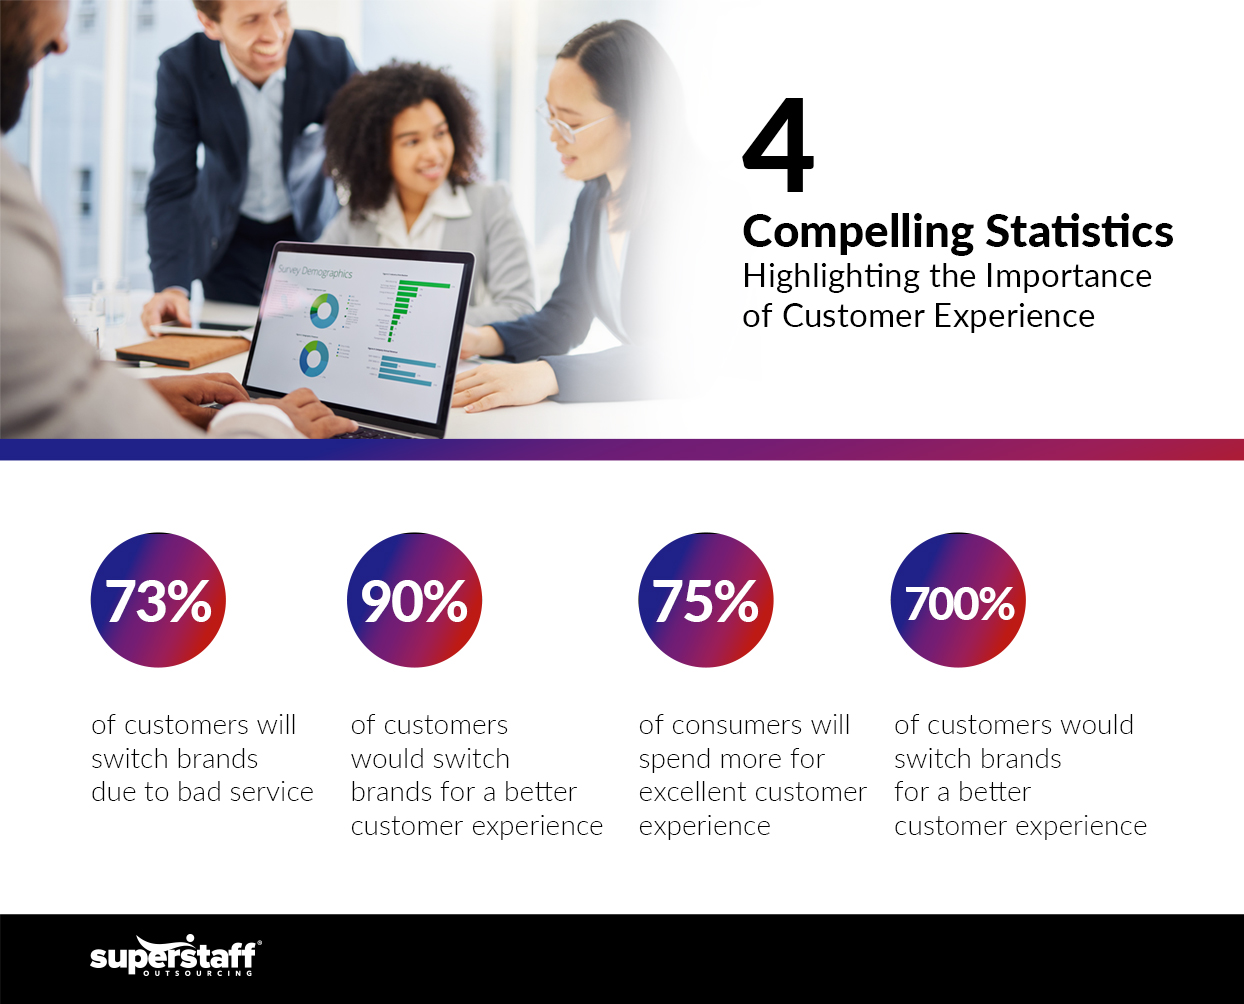 A mini infographic shows statistics on the importance of customer experience